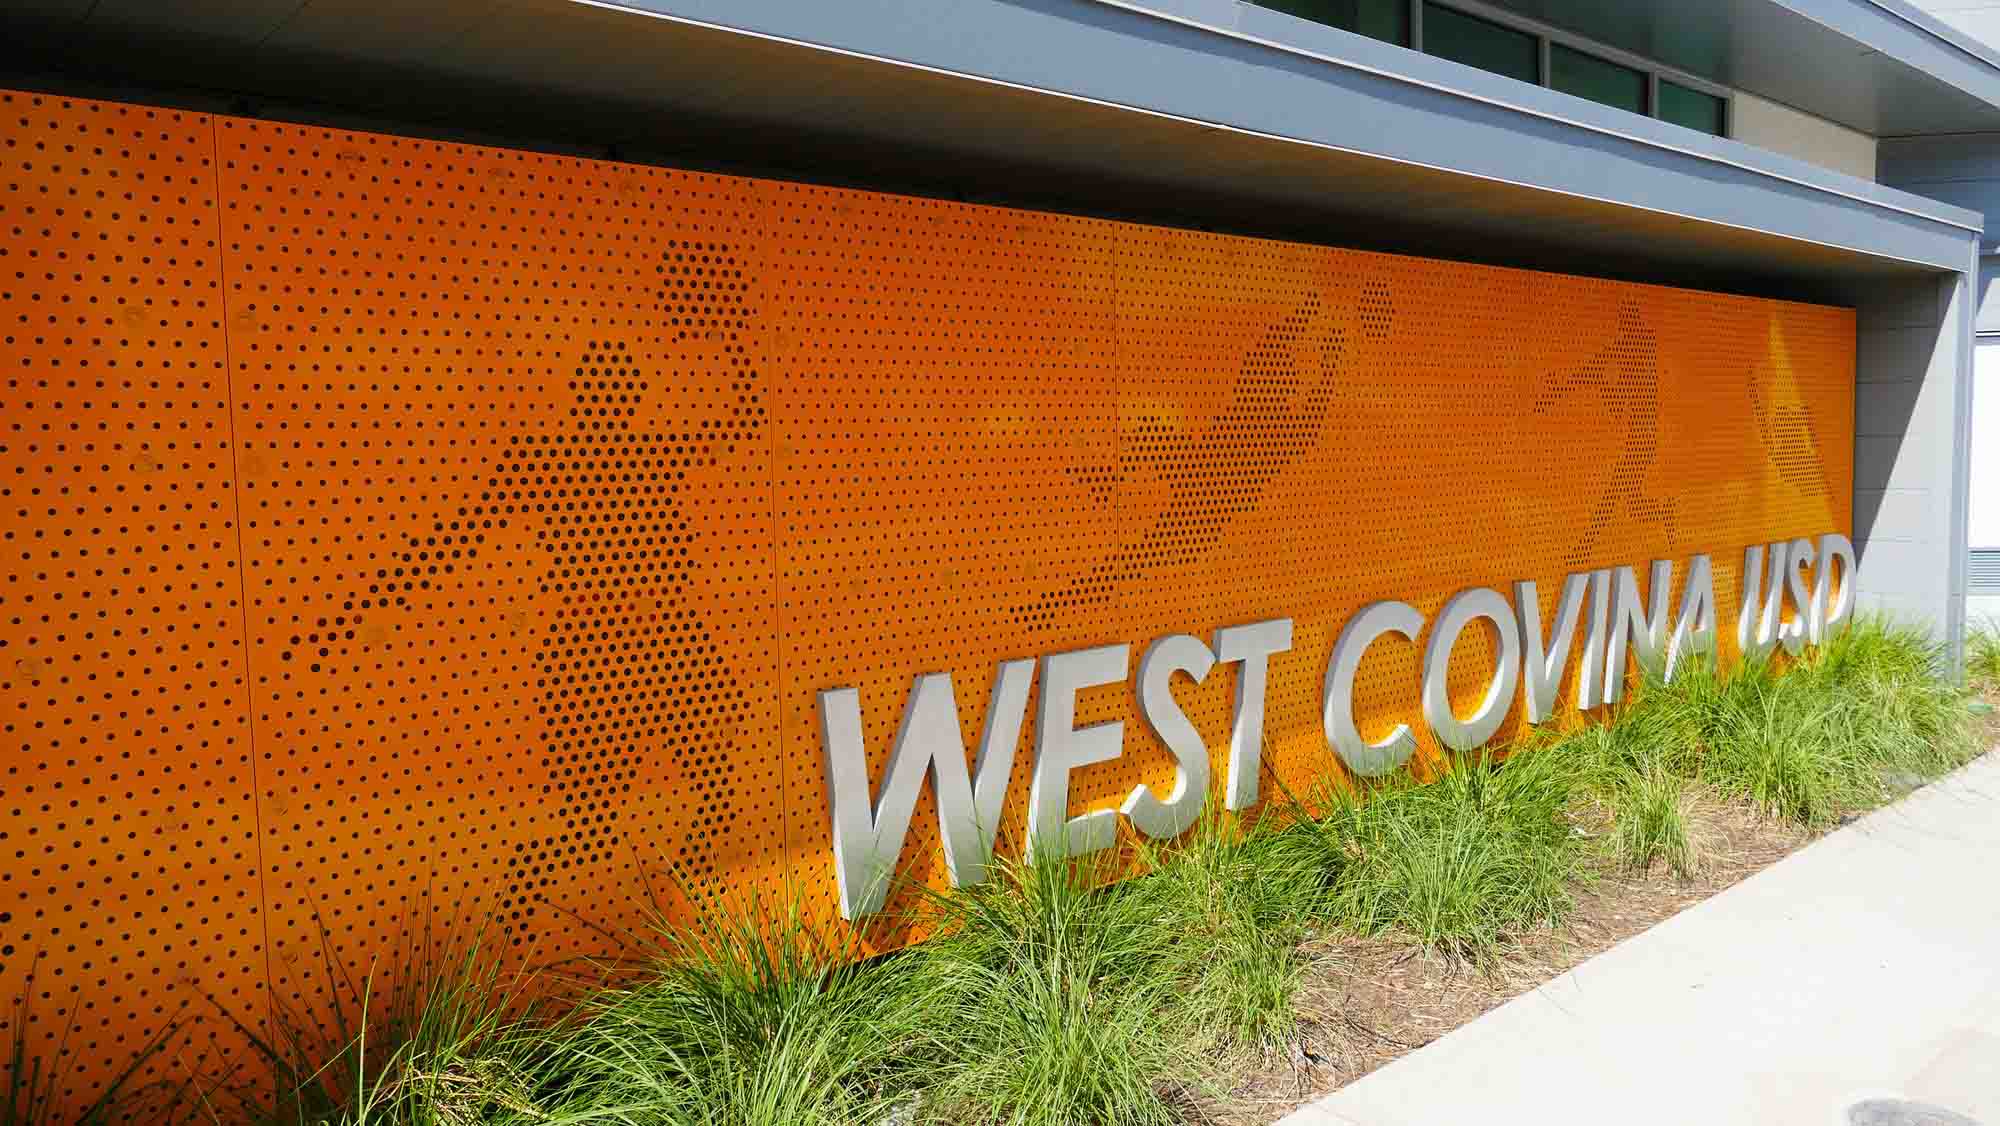 A picture of a custom orange Perforated Metal art piece at Edgewood High School in West Covina, California.